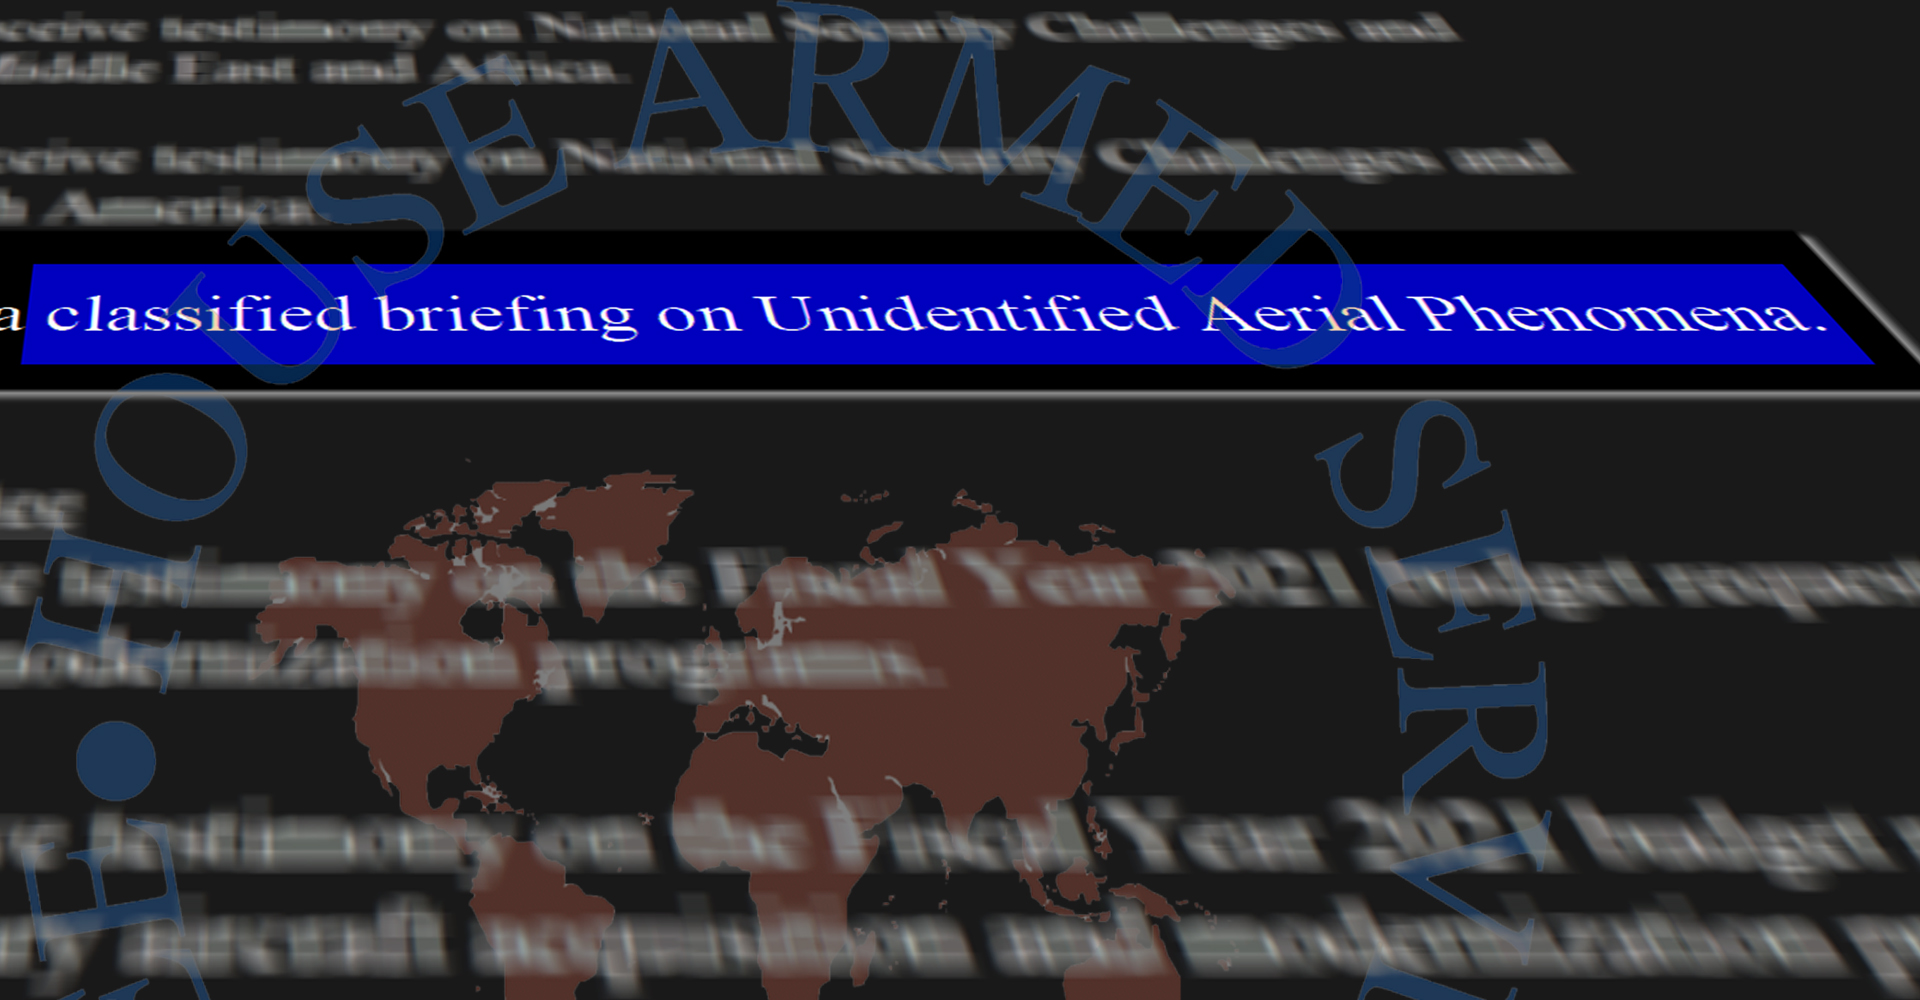 March 11th, 2020, House Armed Services Committee Received Briefing on Unidentified  Aerial Phenomena (UAPs) - The Black Vault